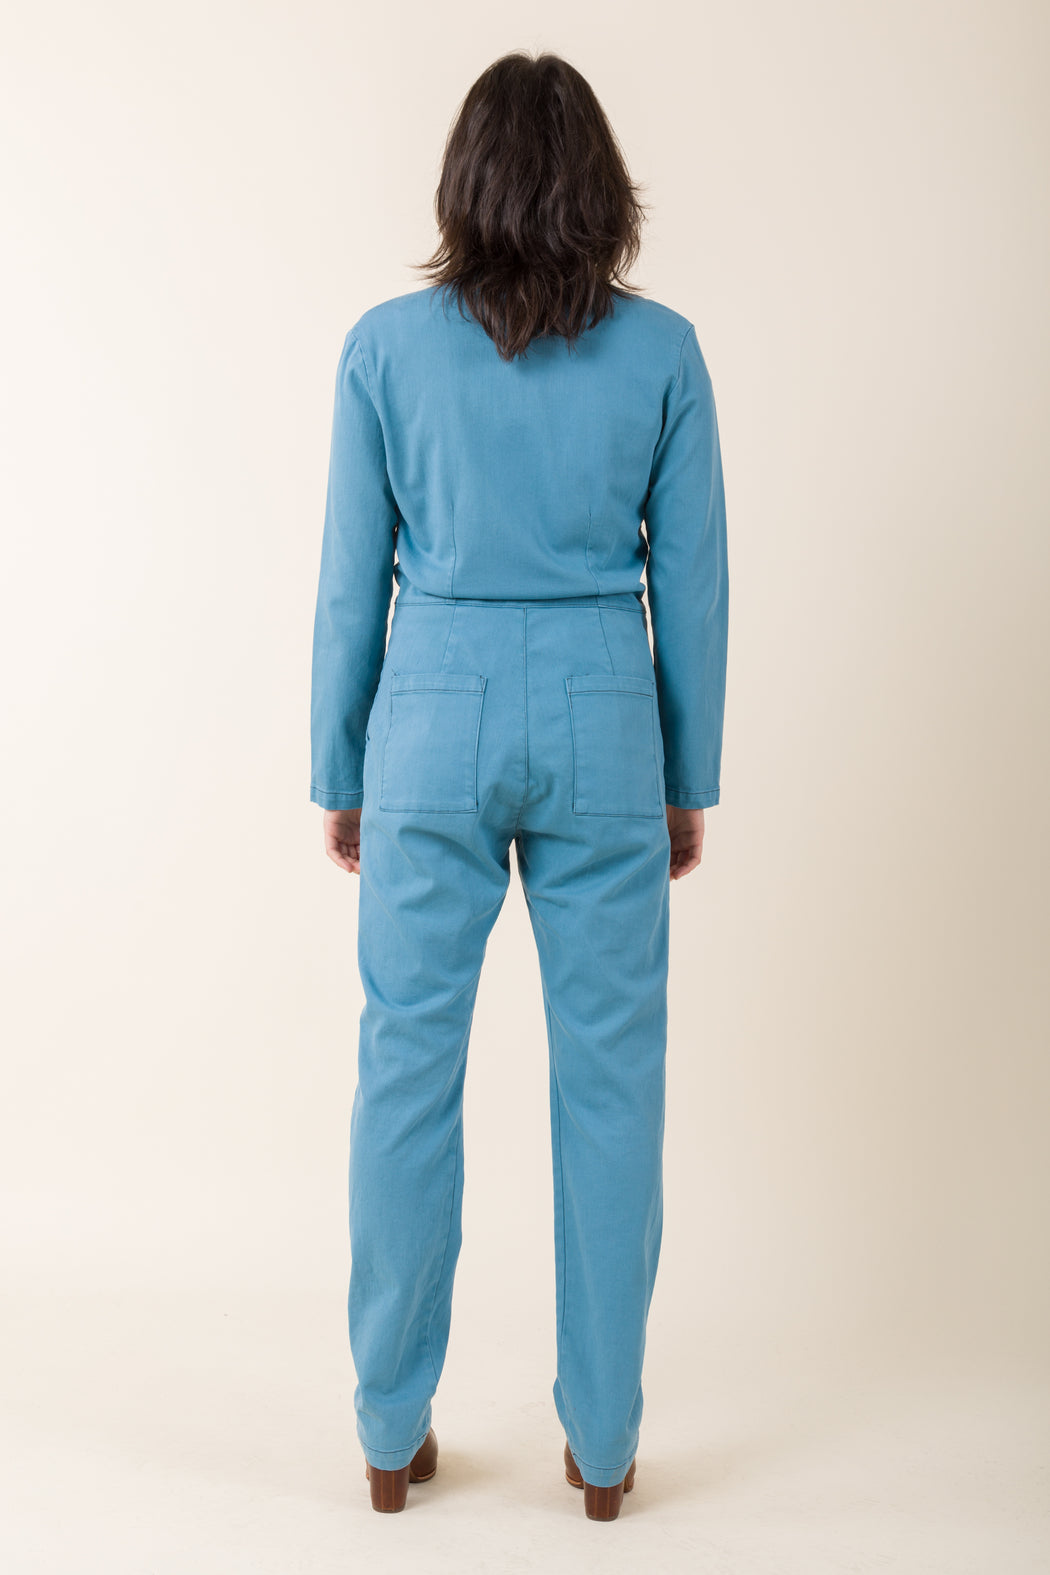 This version of our Denim Coveralls is nipped and darted with a high waist and fitted hip. Bulletproof luxury that is ready for anything, we stripped back details to create the perfect basic coverall.